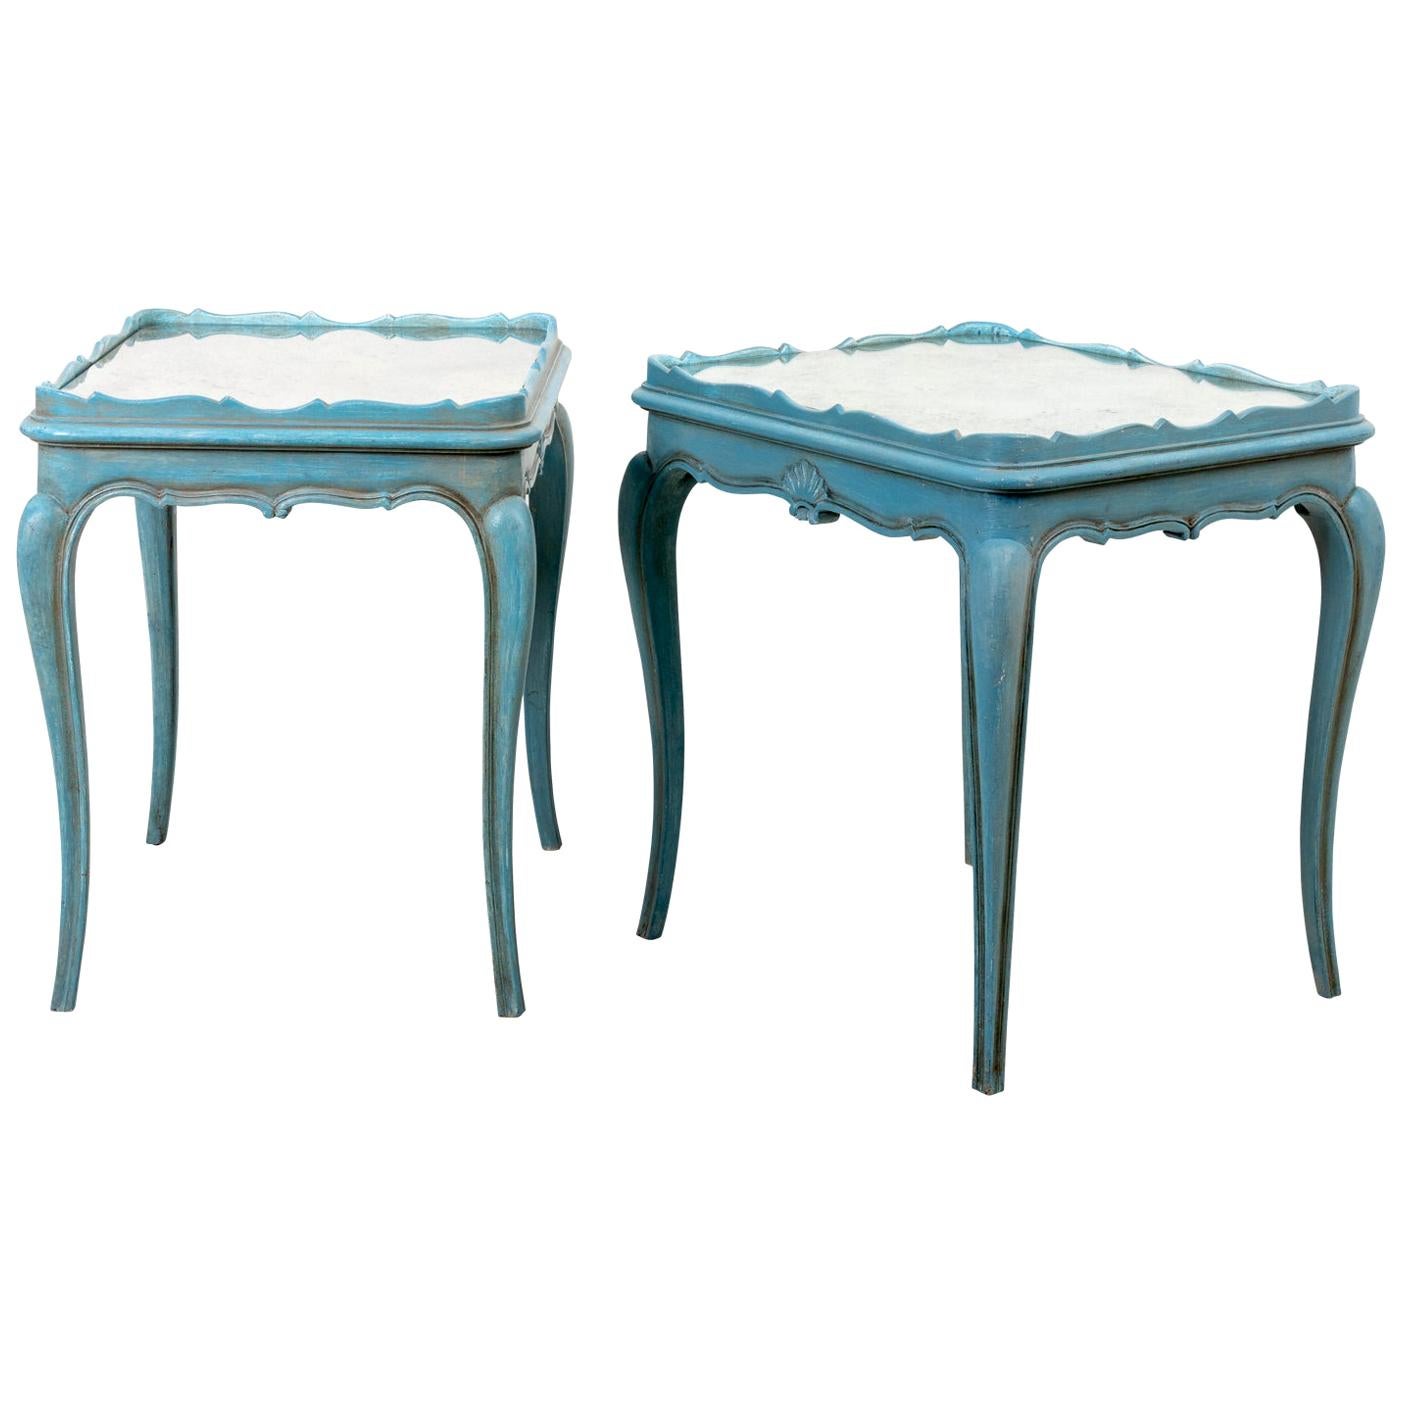 Pair of Louis XVI Style Soft Blue Painted Side Tables with Mirrored Tops